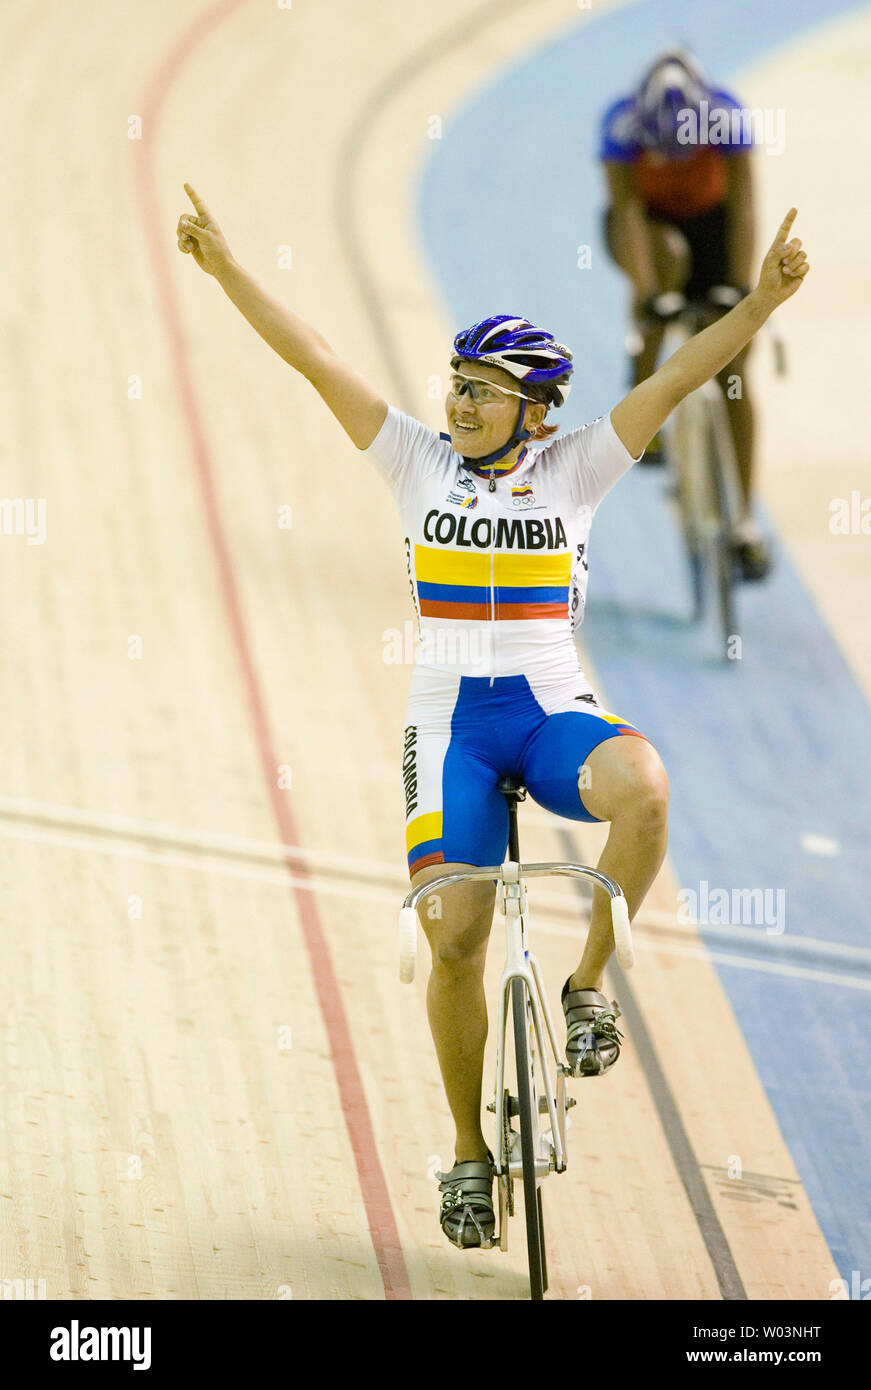 Columbia's Diana Maria Garcia Orrego celebrates winning gold in women's sprint finals of track cycling during the 2007 Pan Am Games in Rio de Janeiro, Brazil on July 18, 2007.  (UPI Photo/Heinz Ruckemann) Stock Photo